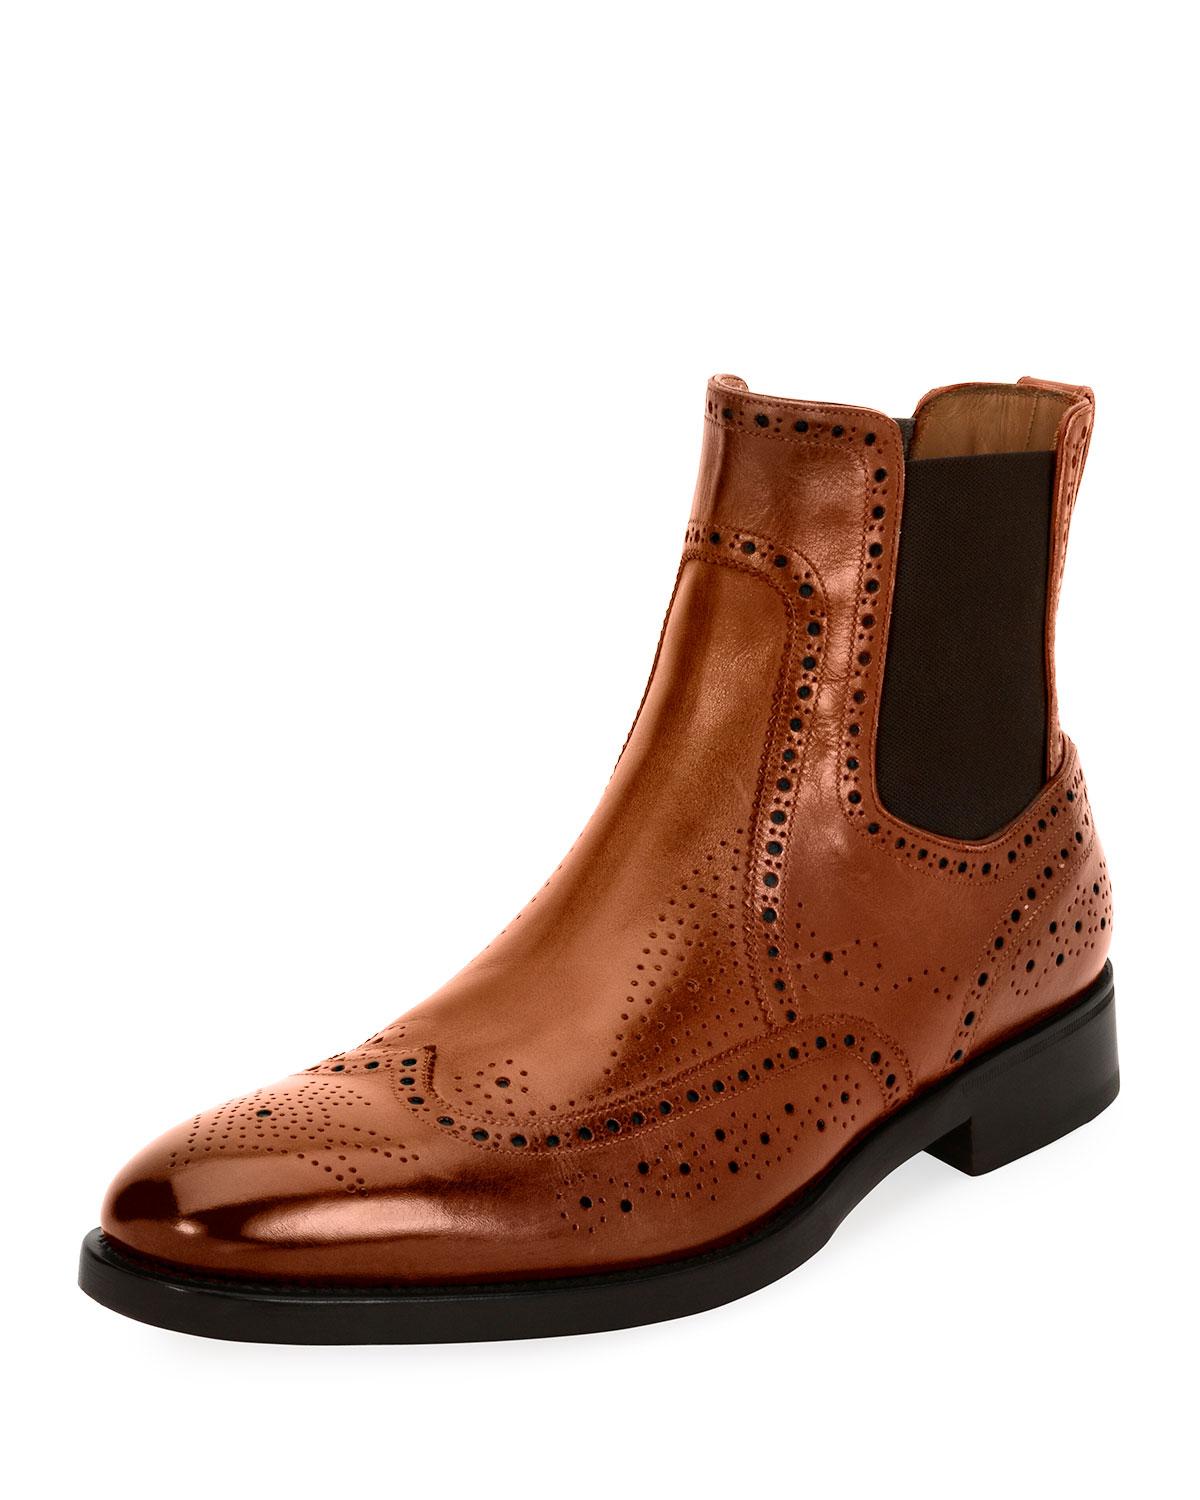 Ferragamo Drifton Wing-tip Brogue Leather Chelsea Boot in Brown for Men ...